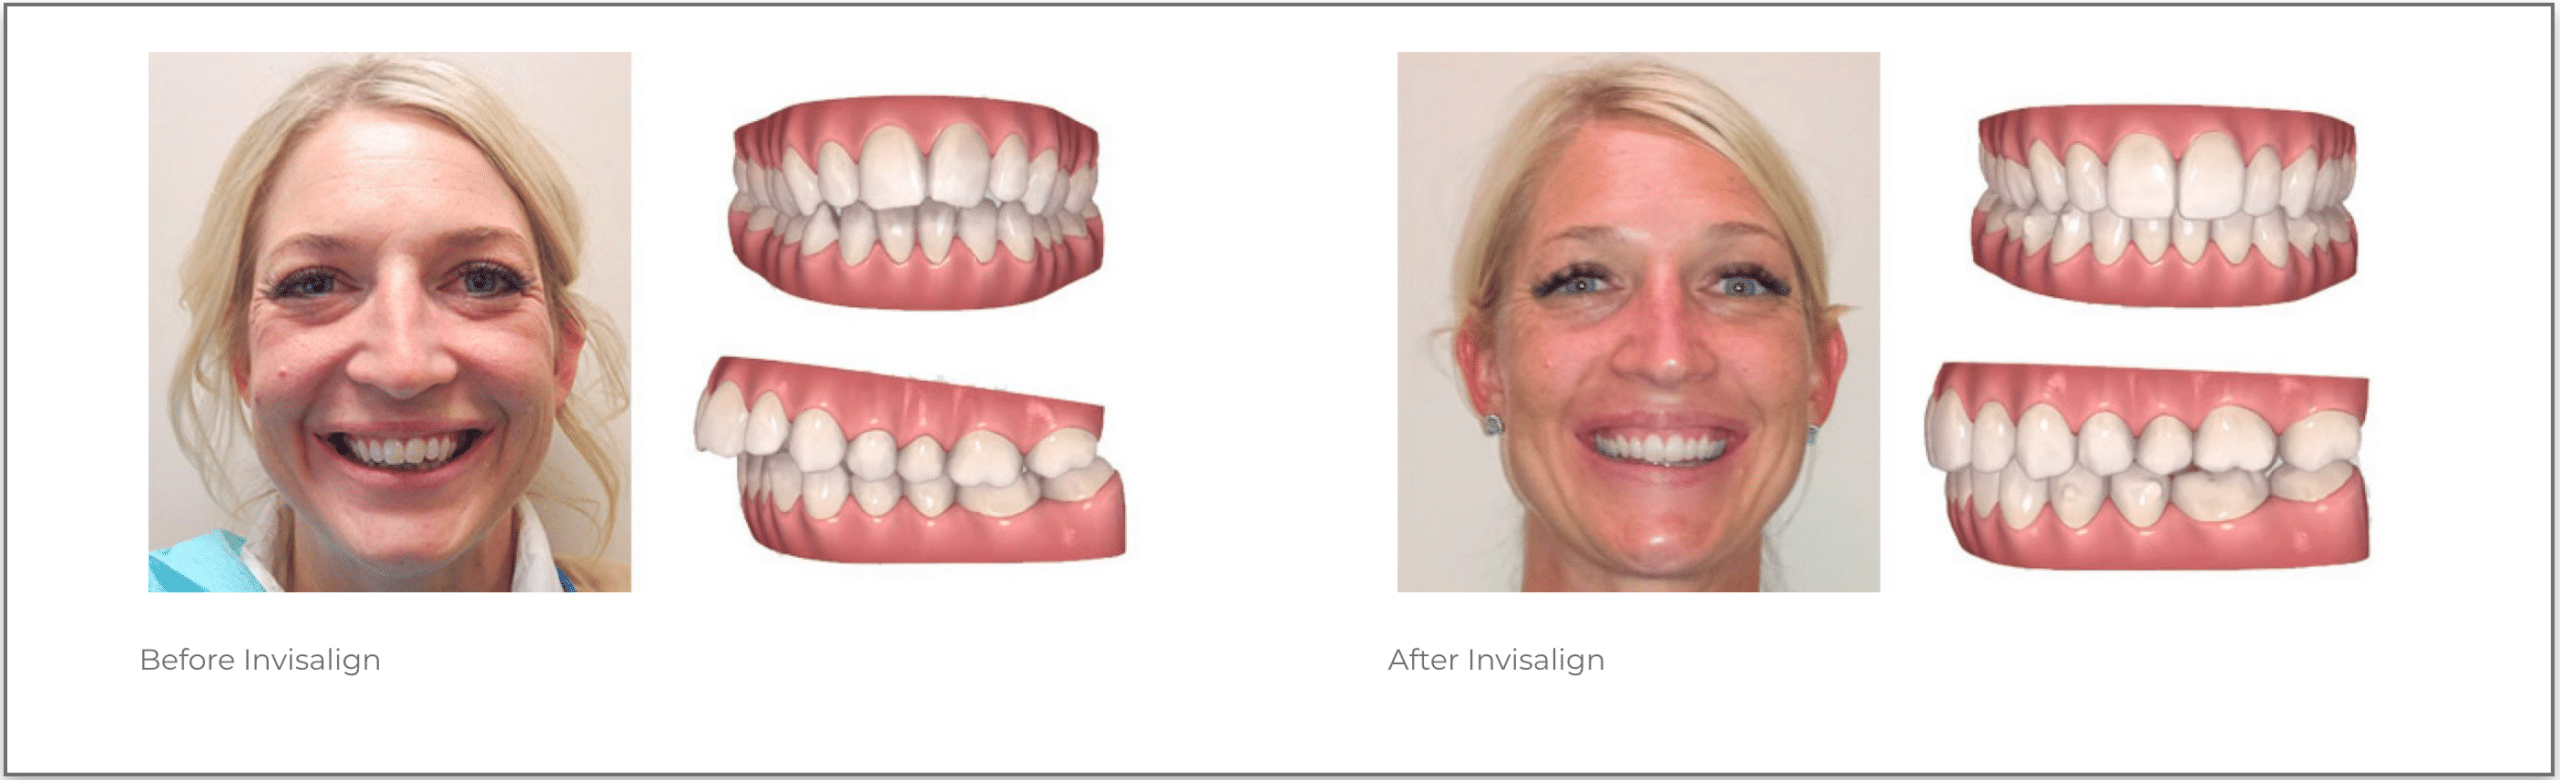 How Much Does Invisalign Cost? - Orthodontic Center of SVC